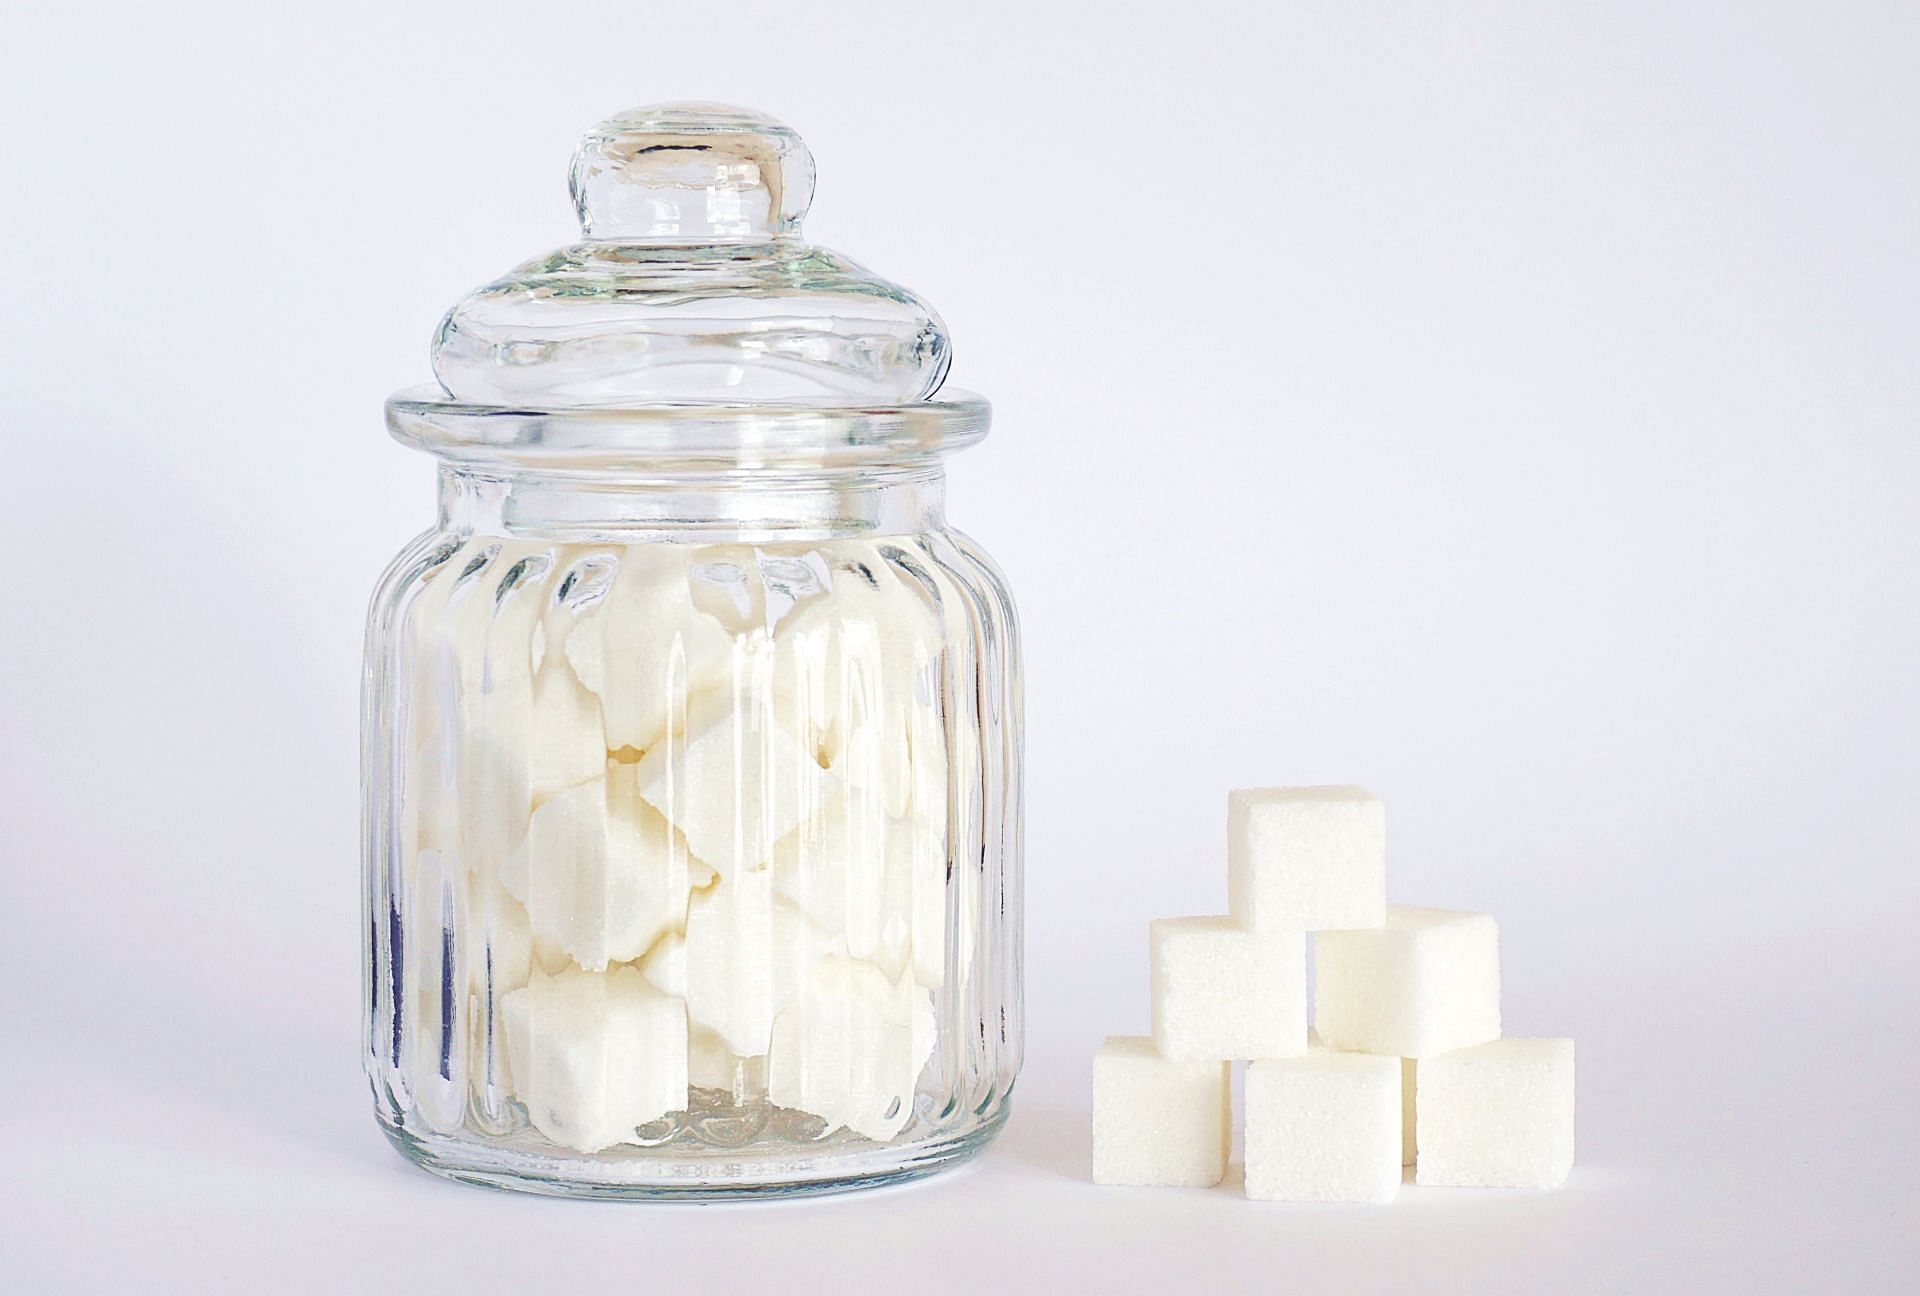 Energy levels increase when you stop eating sugar (image sourced via Pexels / Photo by Hazelwood)